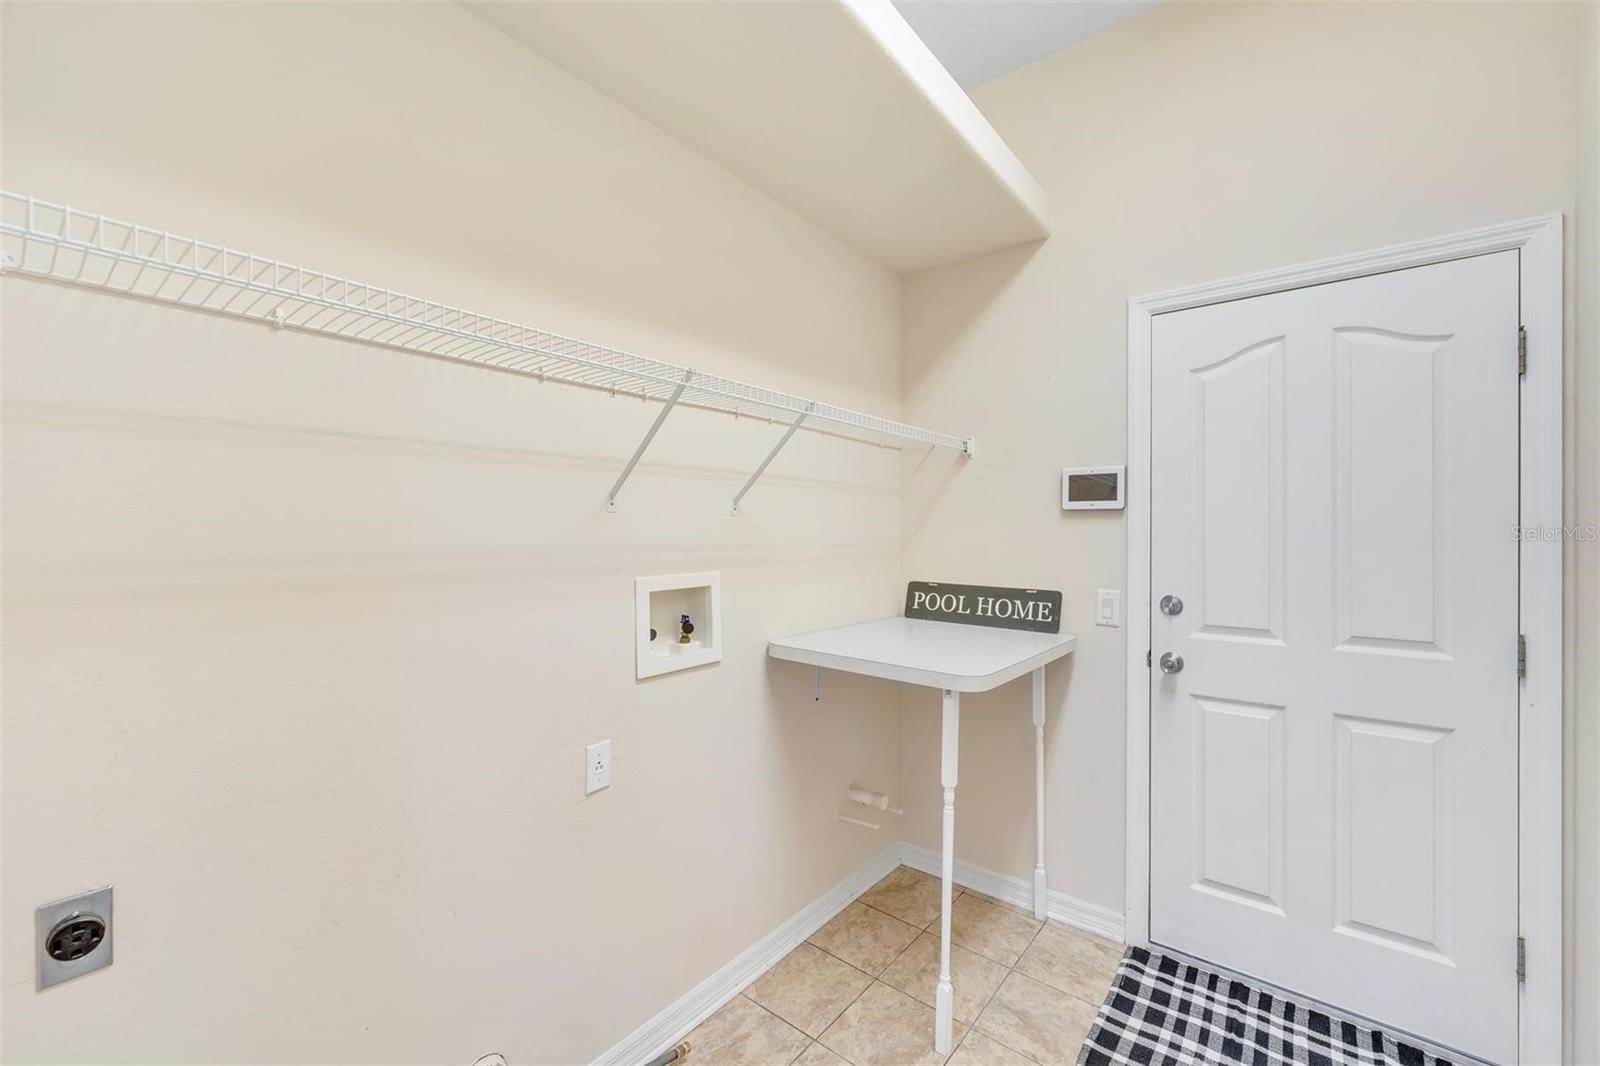 Laundry Room, natural gas avaiable for dryer connection